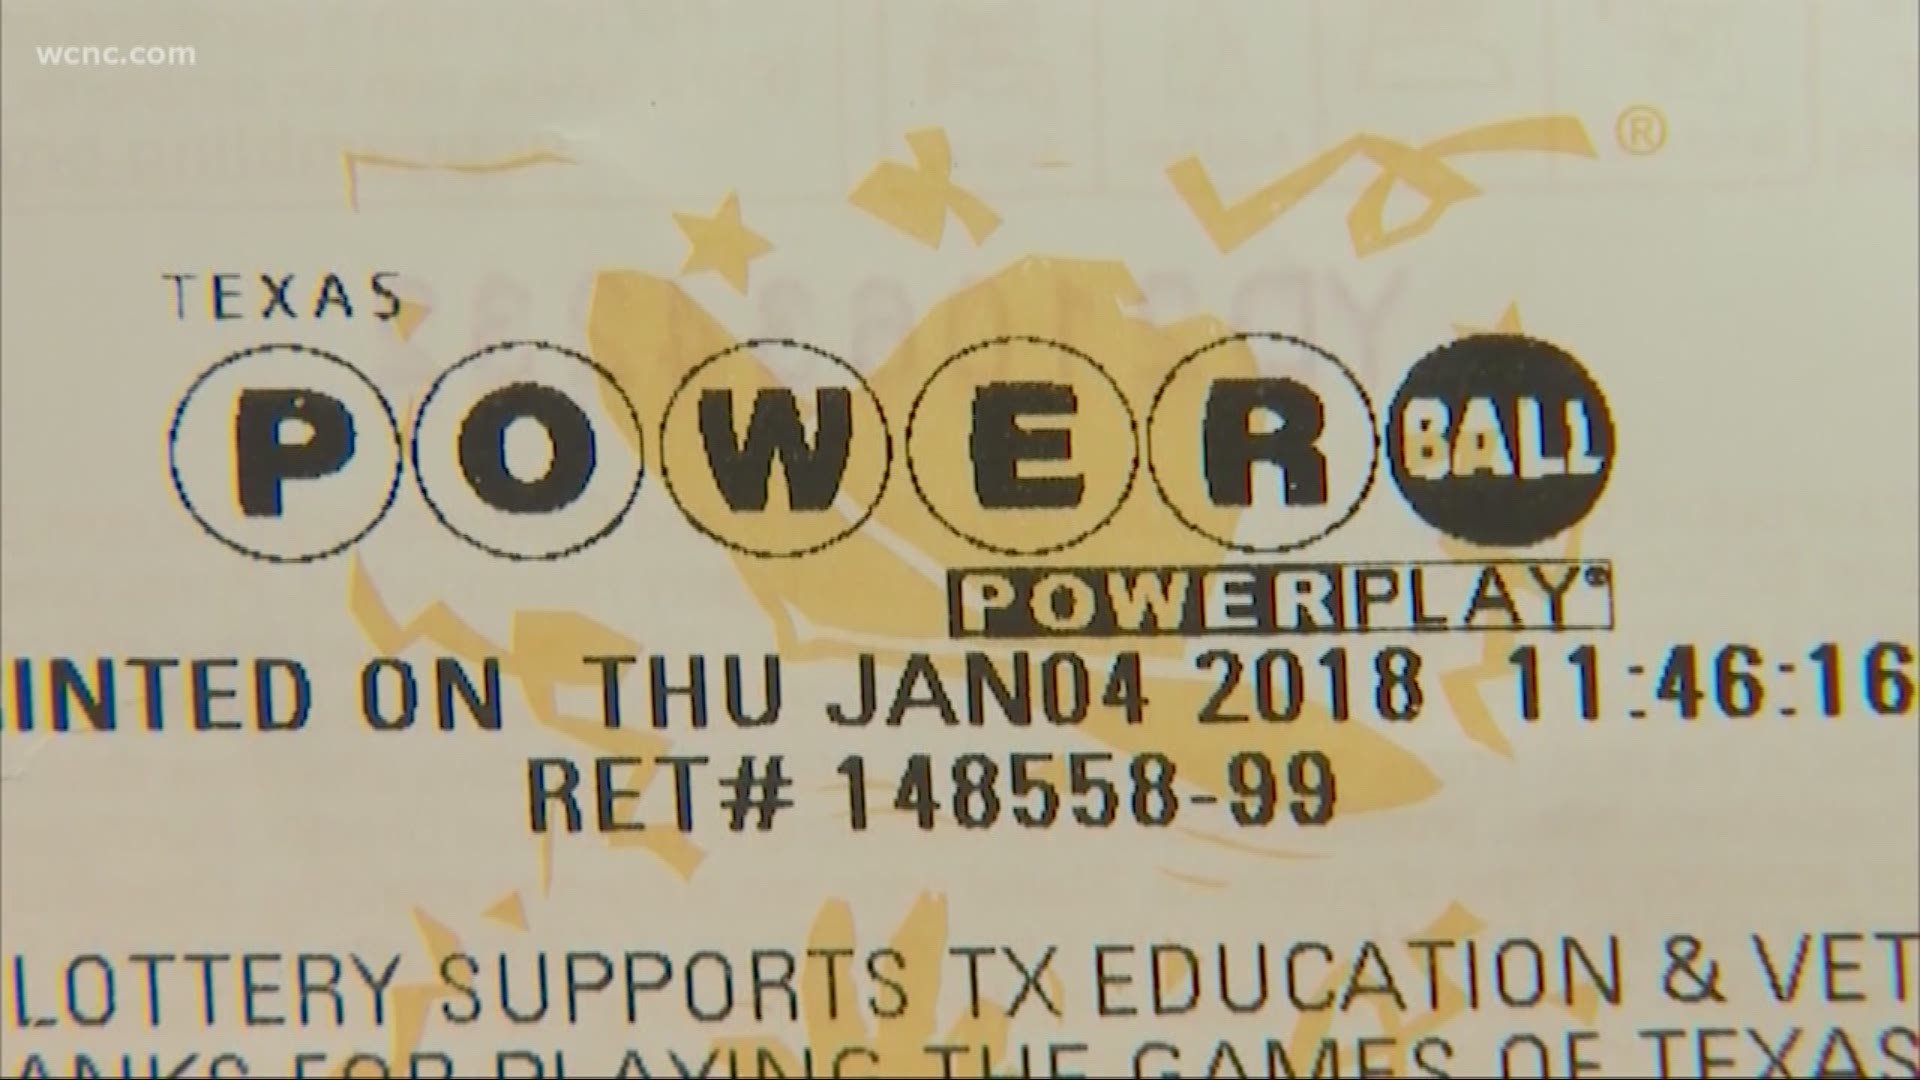 Do you want a lot of money? Like, a LOT of money? You may want to consider playing the Powerball ahead of Wednesday night's drawing, which is for an estimated $550 million.